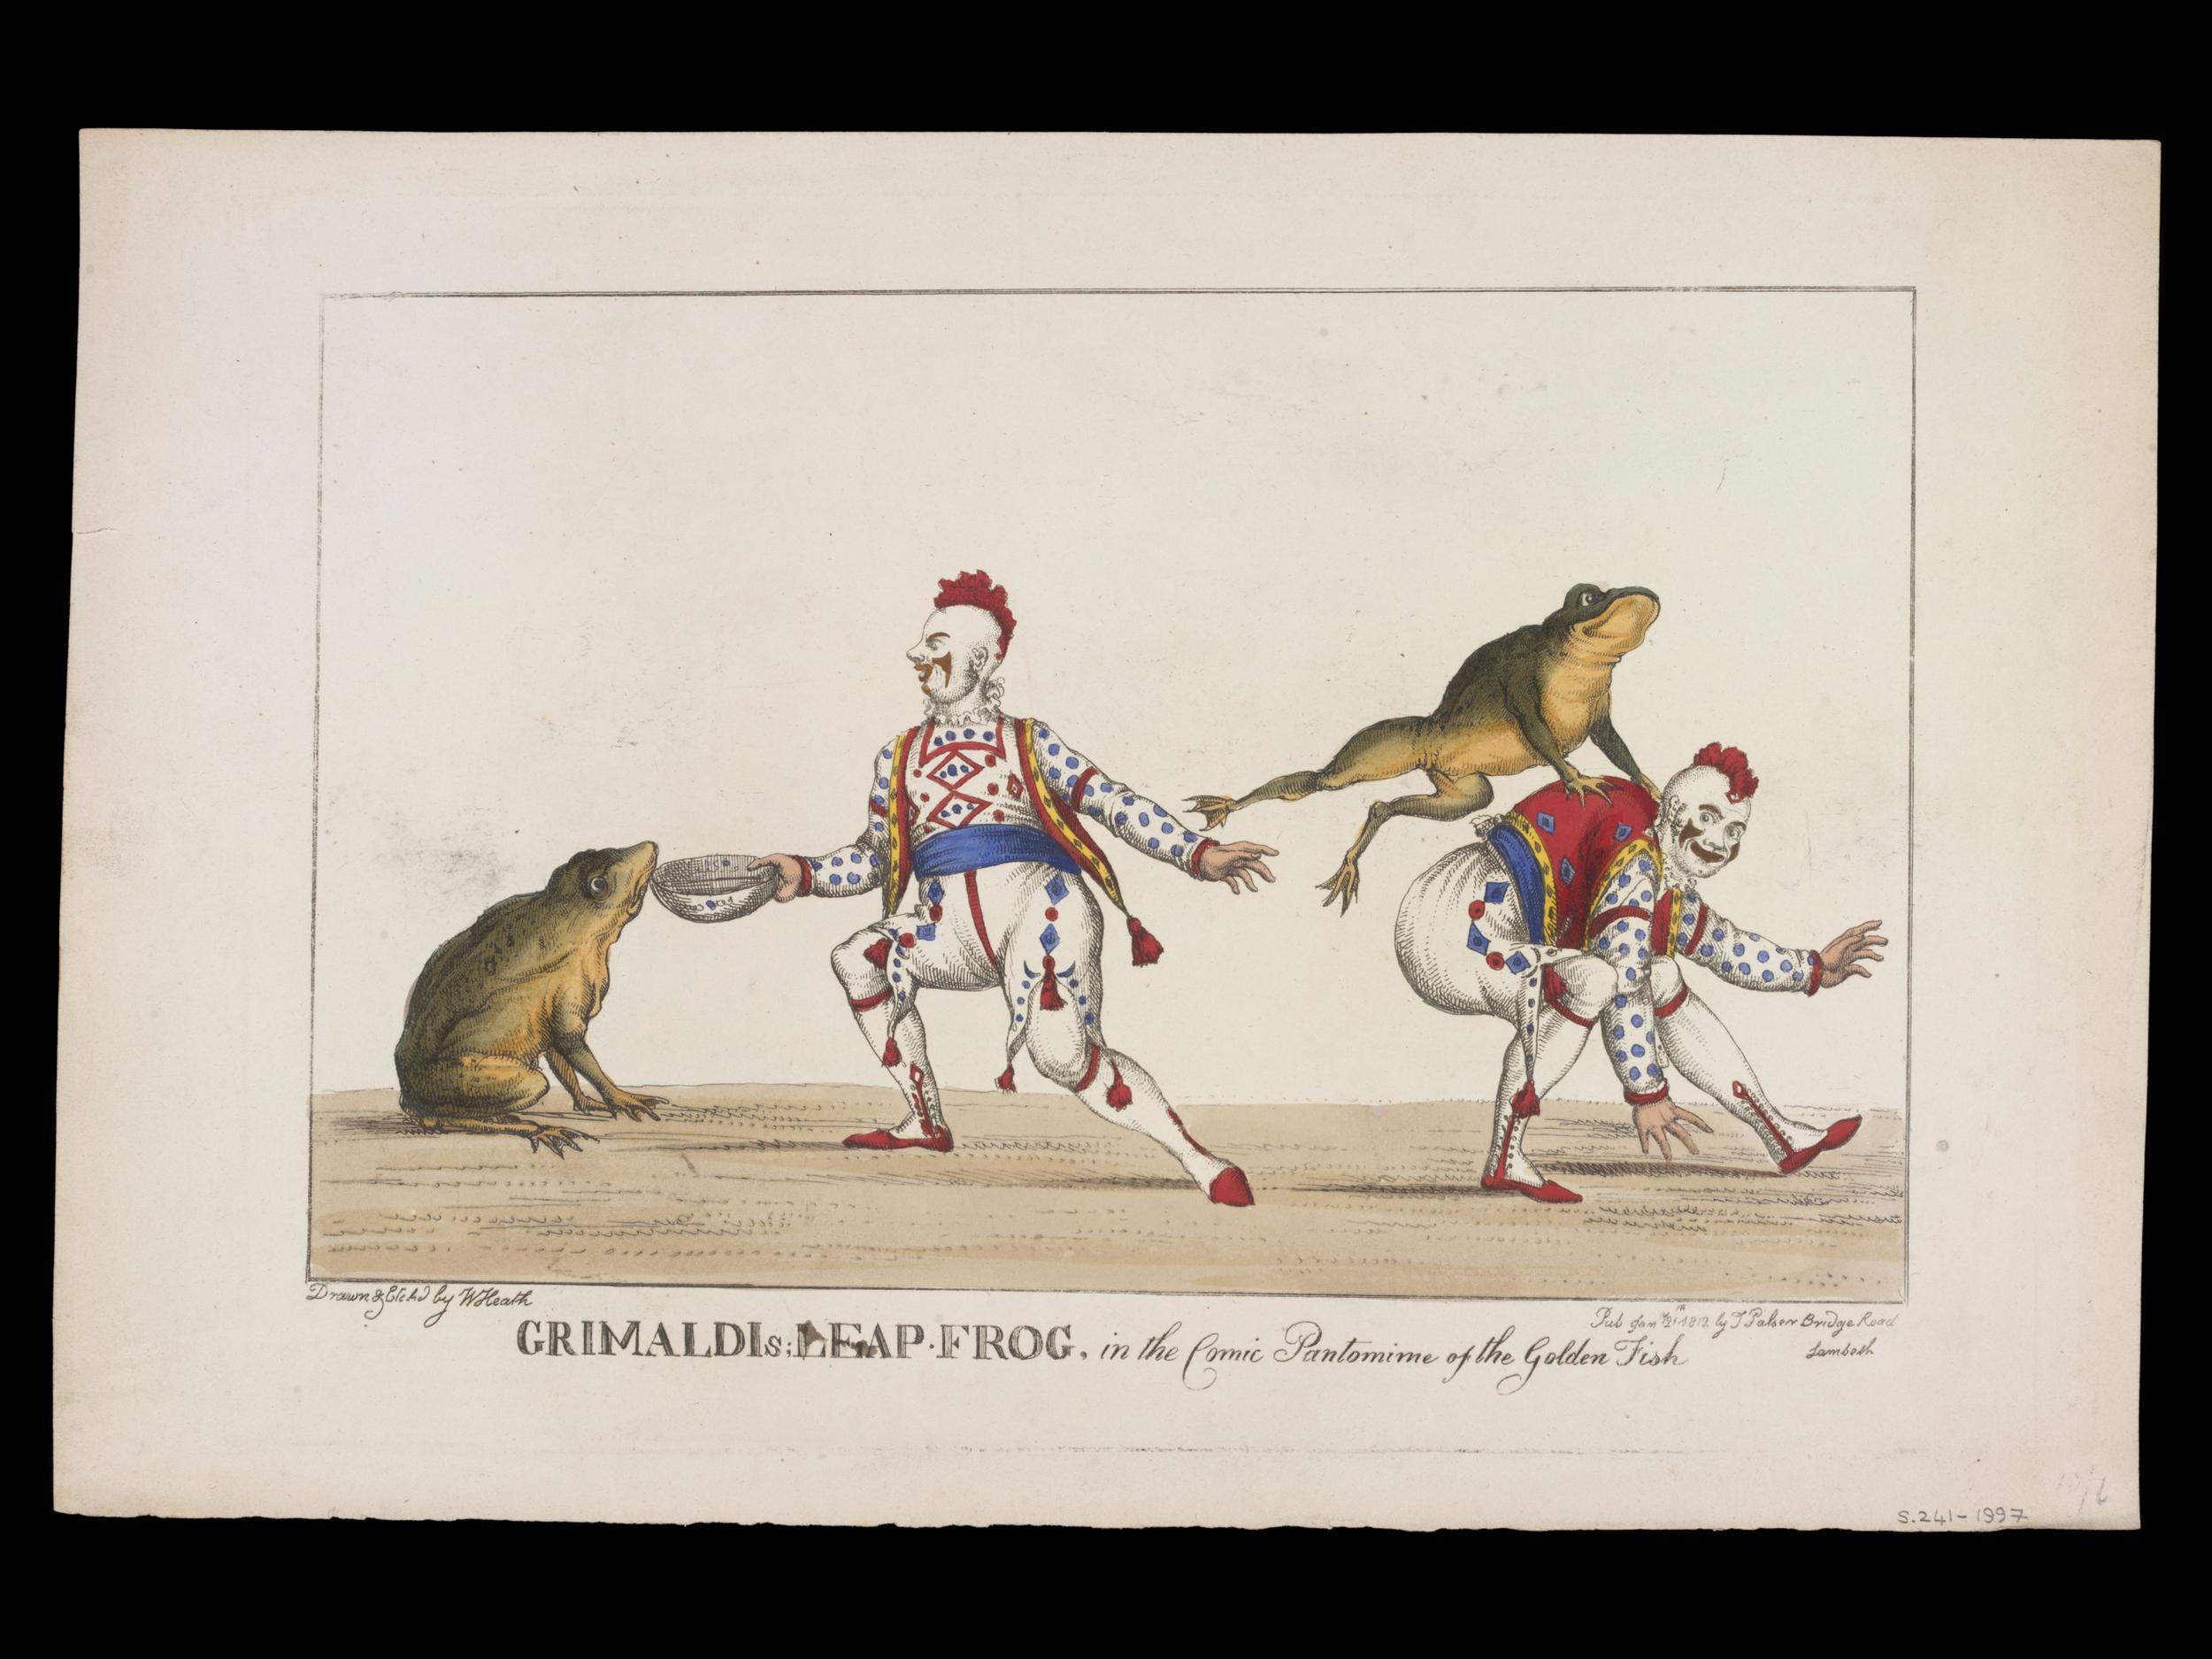 Grimaldi's Leap Frog in the Comic Pantomime of the Golden Fish, stampa, 1812 © Victoria and Albert Museum, London